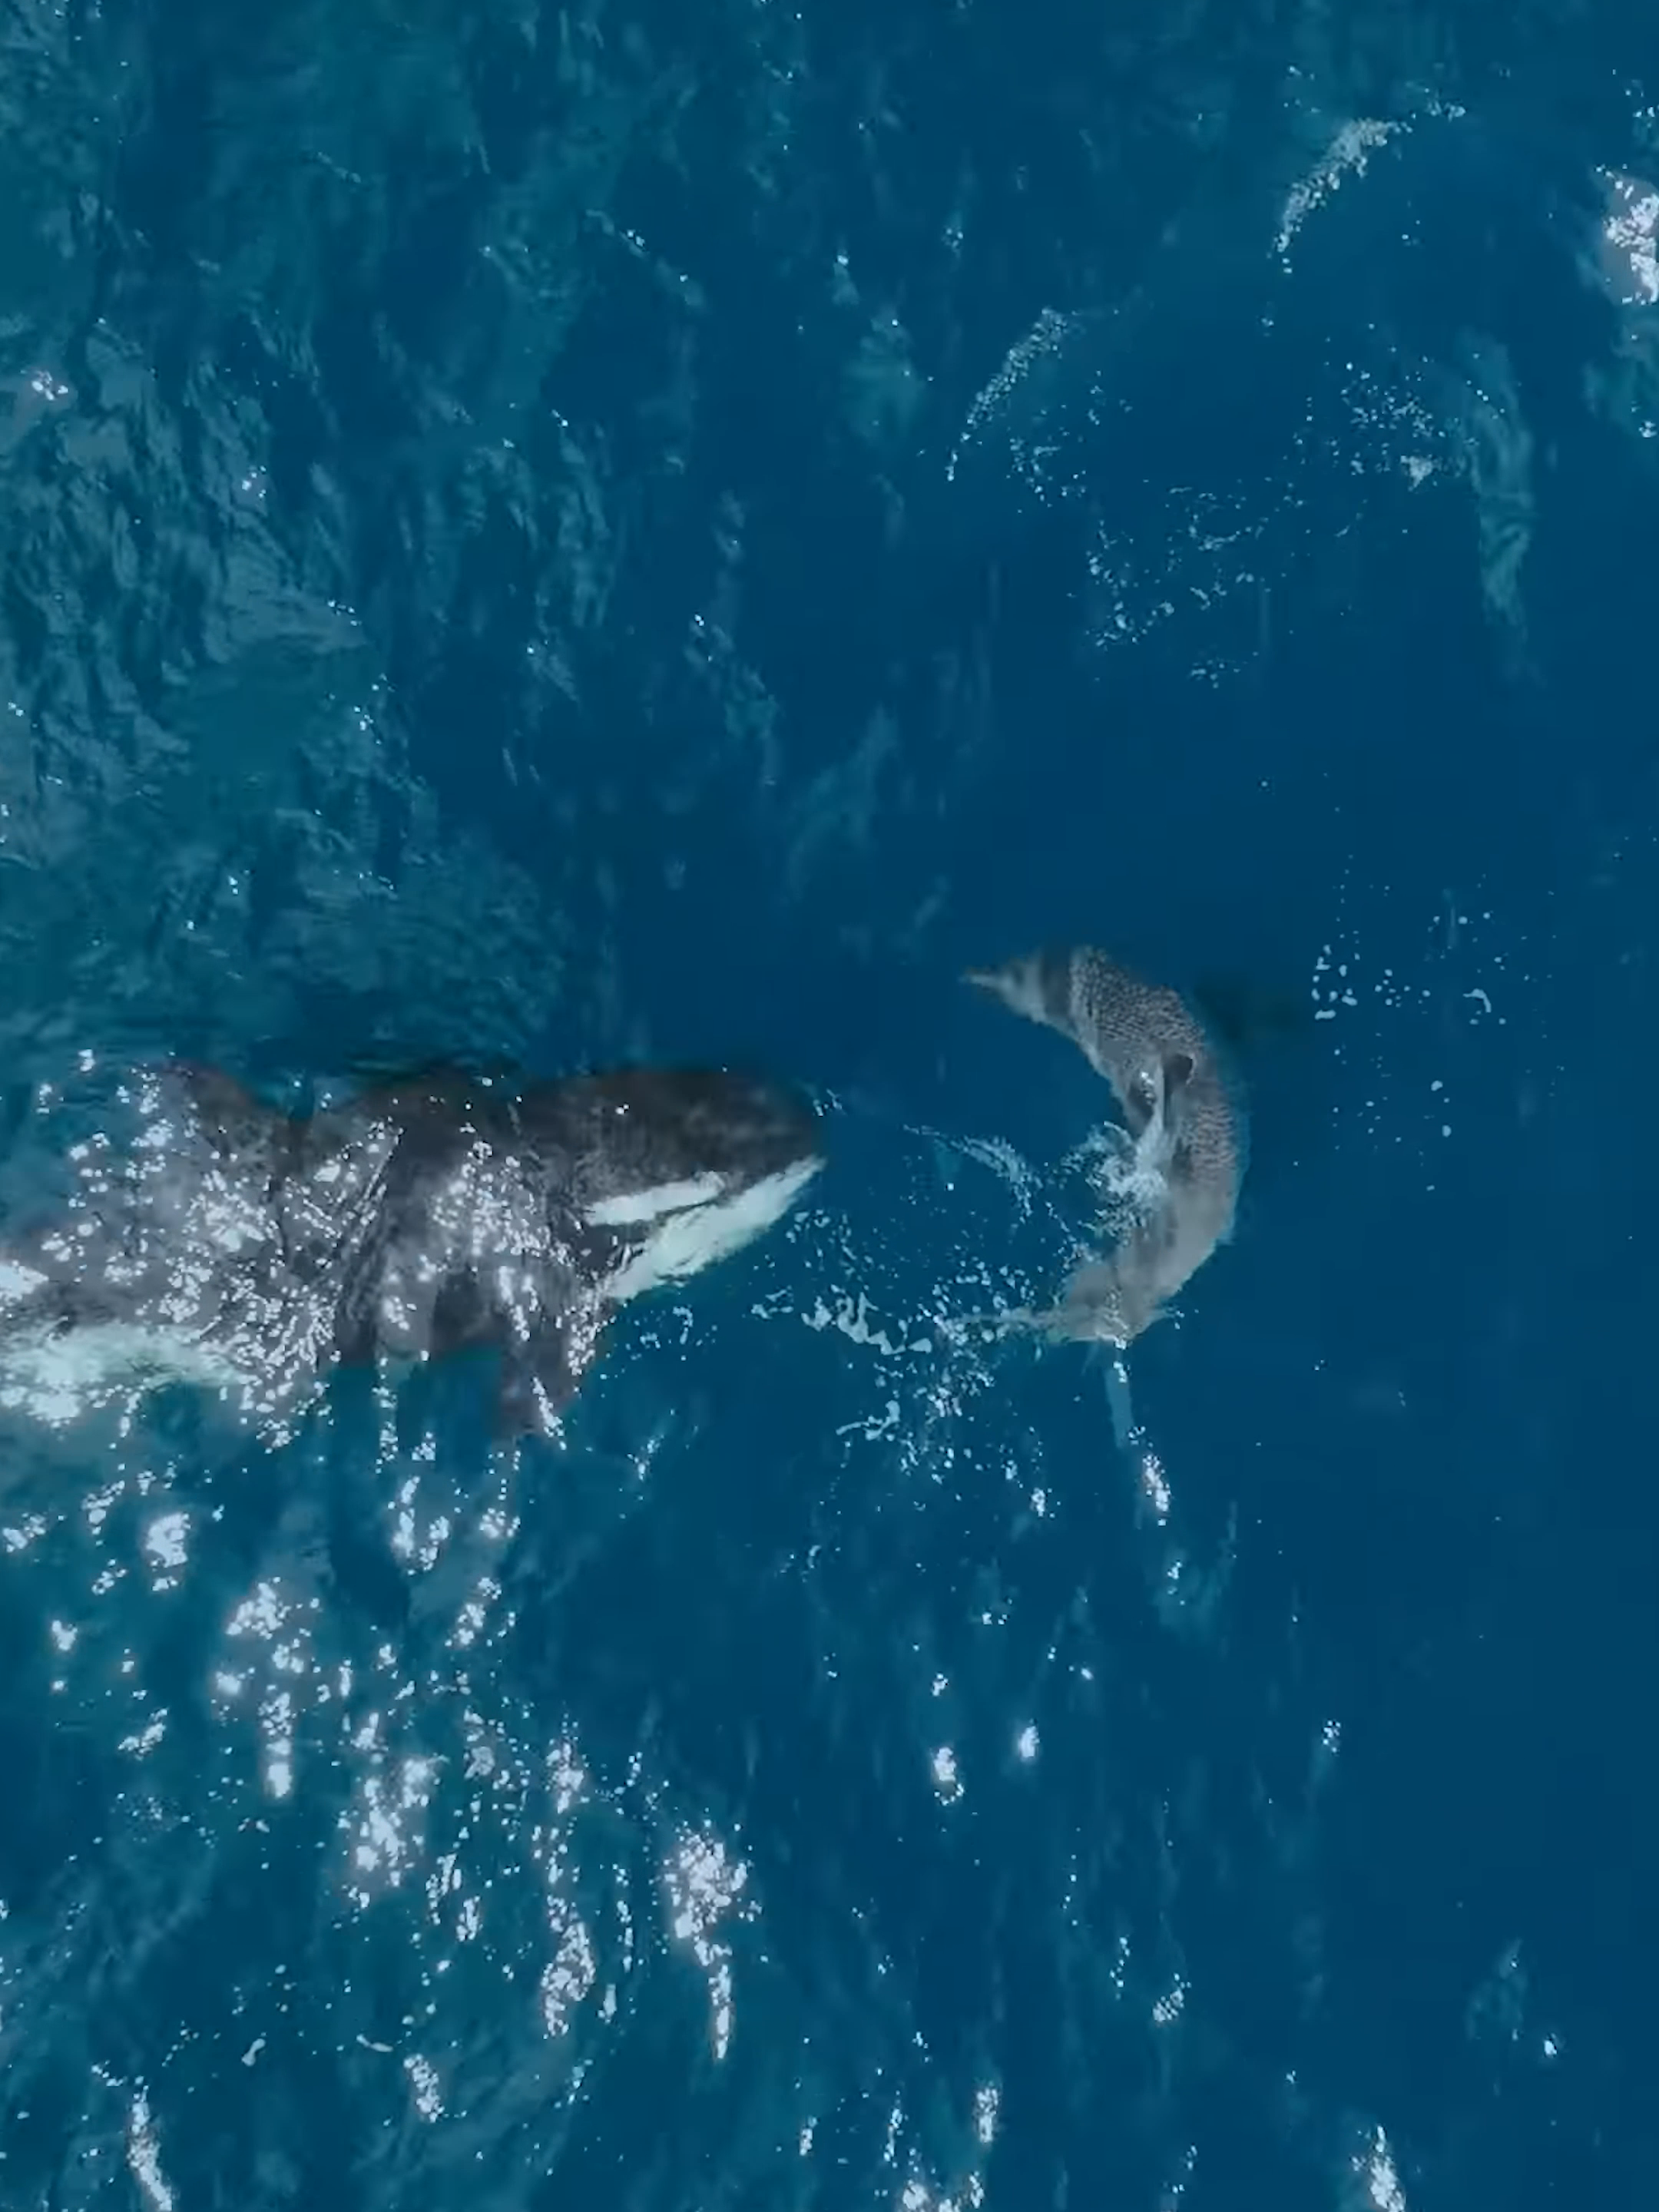 Orca vs. Great White Shark: Epic Battle Under the Sea! 🐋🦈   Witness the incredible power of the Killer whale, also known as the Orca, as it takes on a fearsome Great white shark in a battle for dominance. 🐋🦈 Watch as the Orca's mighty strike shatters the shark's ribs, leaving it vulnerable in the depths of the ocean. Did you know that Orcas are known to hunt and eat sharks, using powerful strikes to immobilize them? Will the shark retaliate, or will the Orca emerge victorious?  Comment below with your thoughts on this intense showdown between two apex predators! Don't miss out on this thrilling encounter that showcases the raw power of nature. 🌊🔱 #Orca #GreatWhiteShark #UnderwaterBattle #PredatorvsPredator #WildlifeShowdown #OceanPredators #EpicEncounter #MarineLife #naturepower #SavageSea #WildlifeVideo #NatureDrama #TikTokWildlife #MarinePredators #OceanLife #ThrillingEncounter #ApexPredators #NatureFacts #AnimalKingdom #MustSeeNature